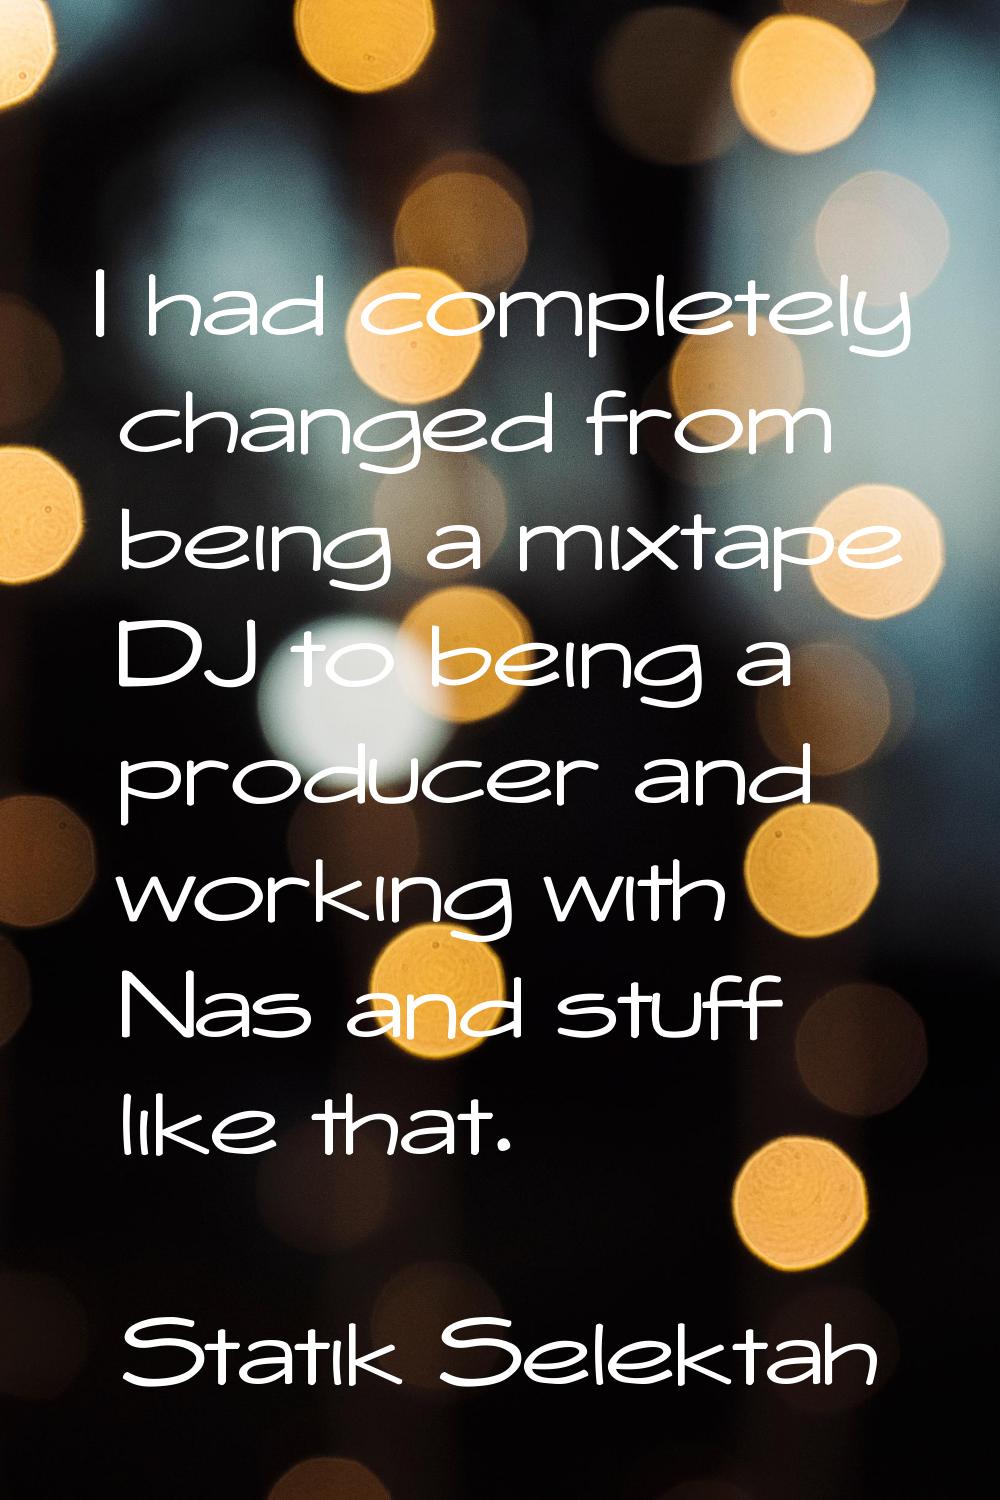 I had completely changed from being a mixtape DJ to being a producer and working with Nas and stuff